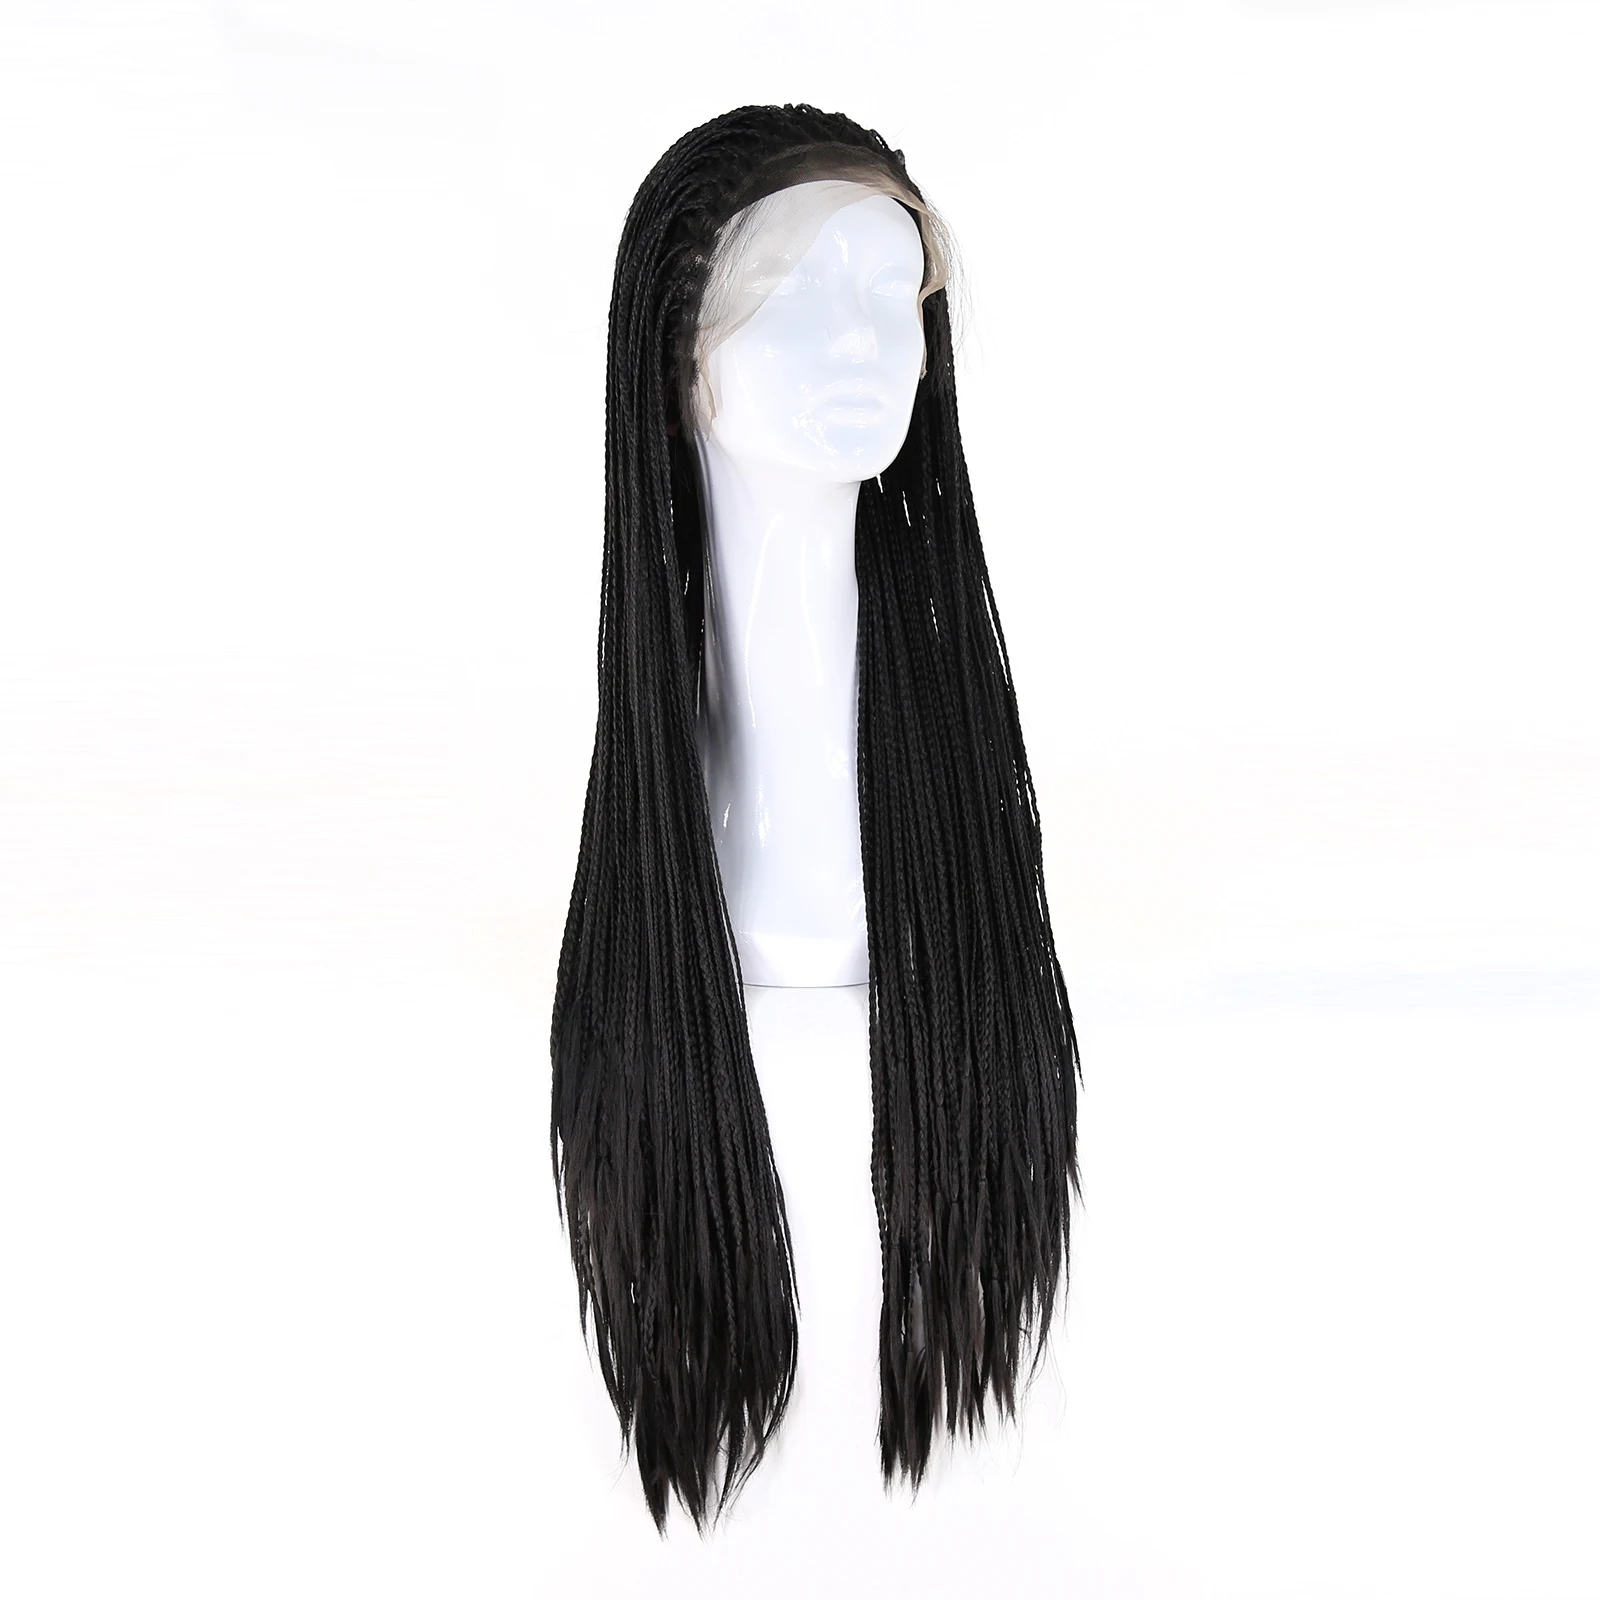 BTWTRY Black Braided Synthetic Lace Front Wig for Black Women Heat Resistant Fiber Hair with Baby Hair Micro Braided Hair